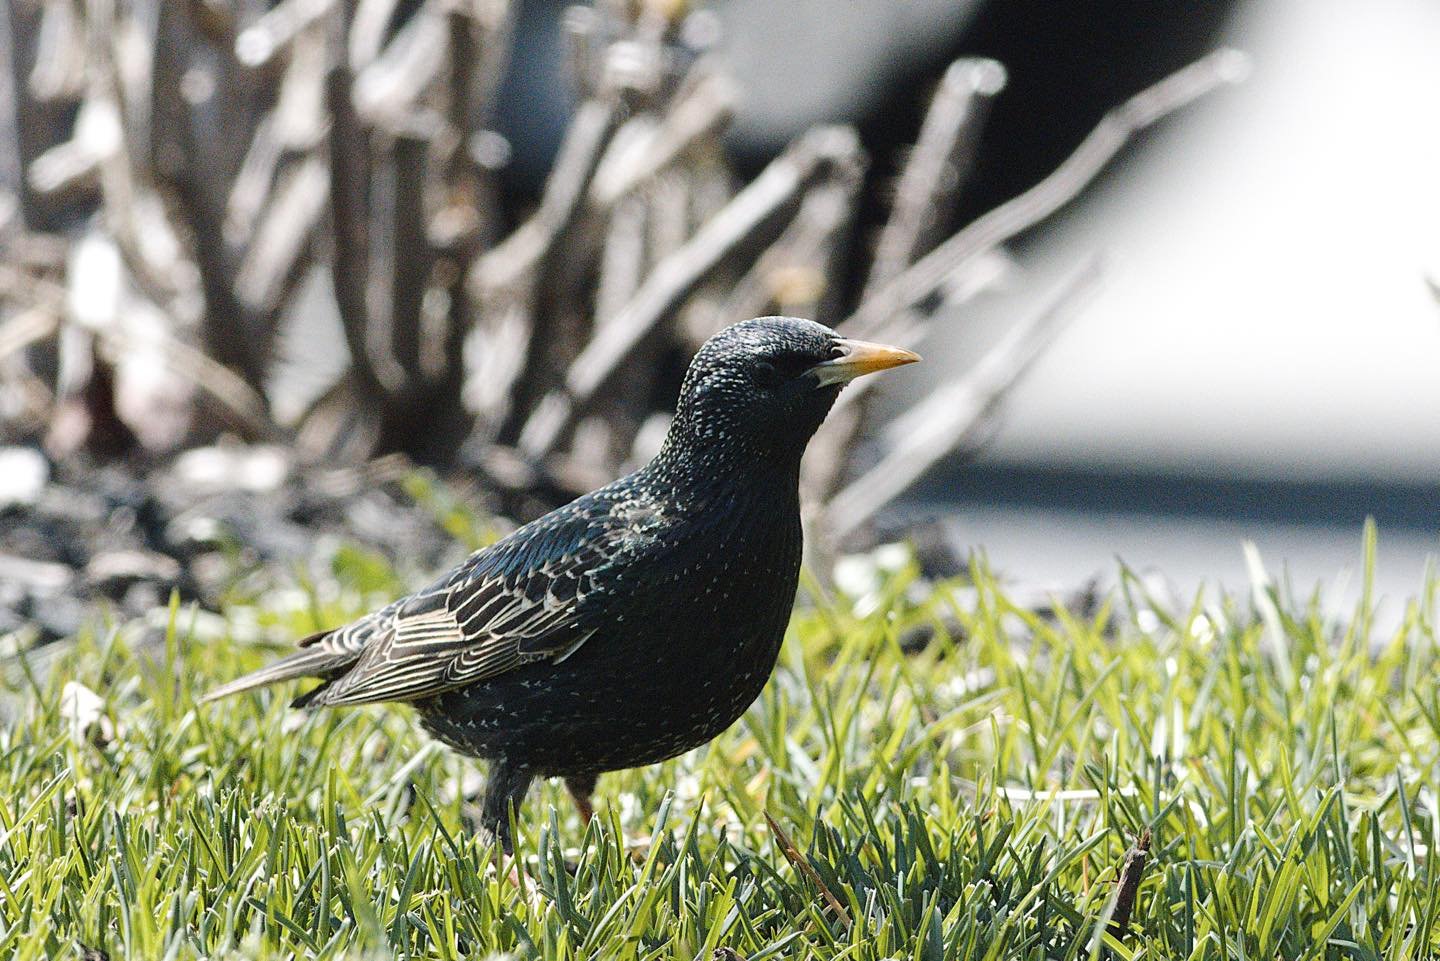 Mozart had a pet starling, which could mimic part of his Piano Concero in G Major.

(Common starling)

#igdaily #instagood #photo #newenglandwildlife #earthfocus #naturewalk #naturephotography #newenglandnature #wildlifephotography #digitalart #photo